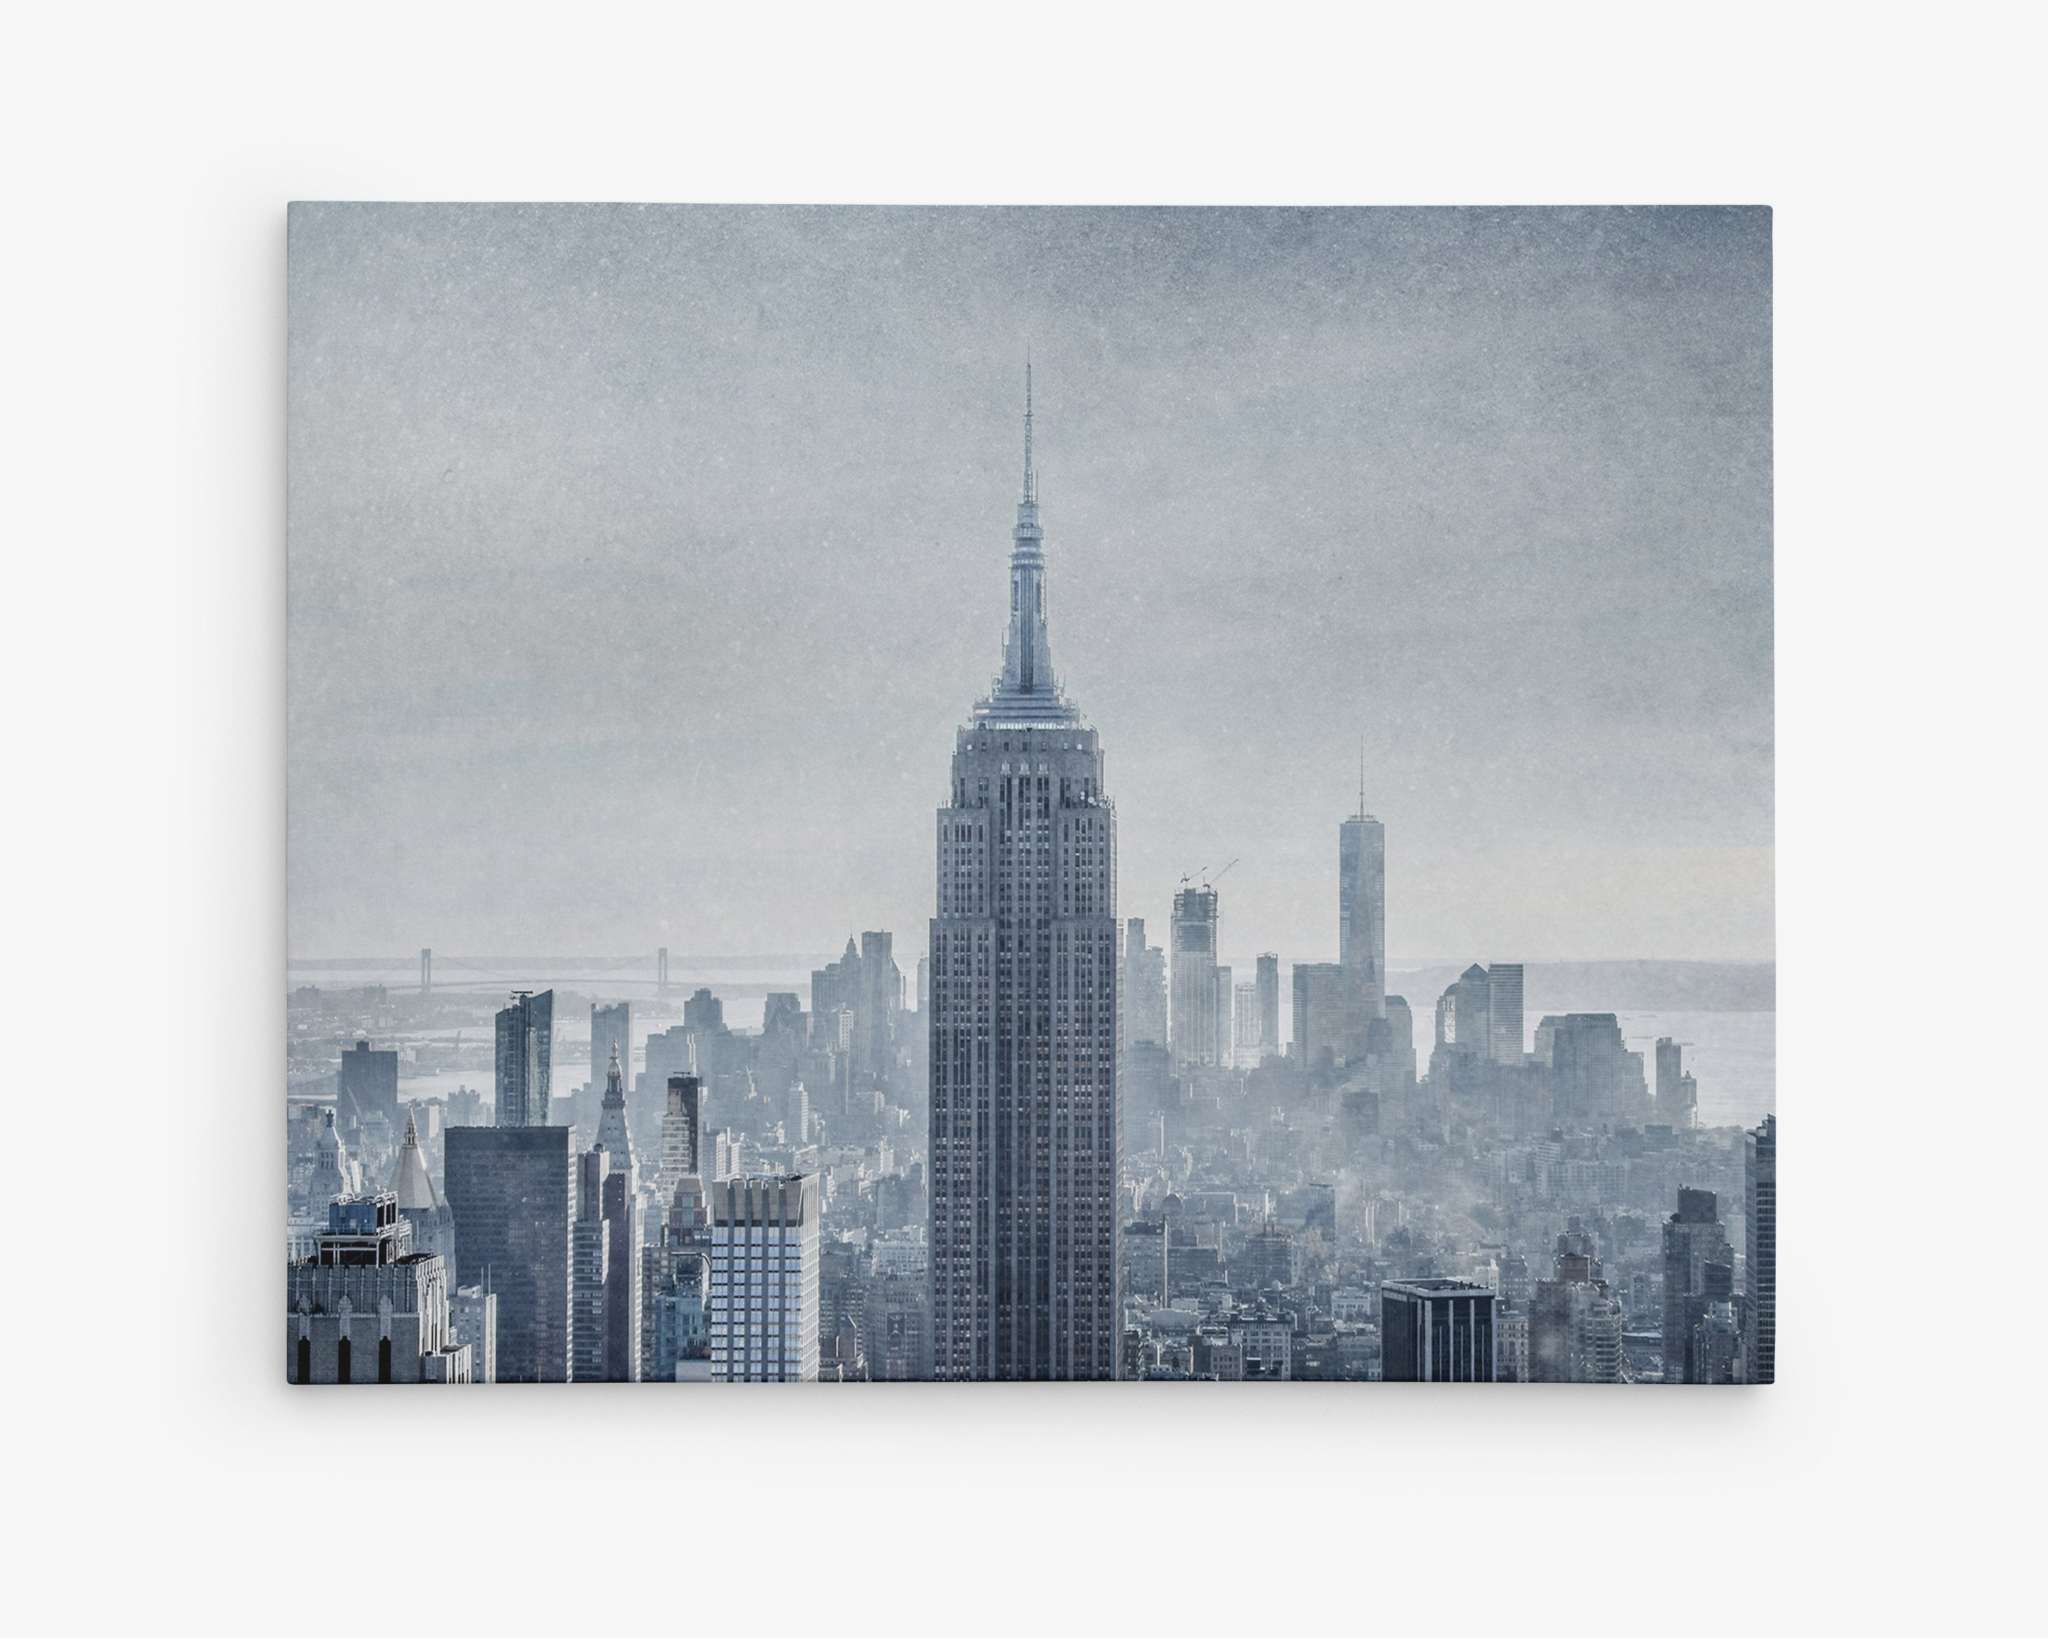 A hazy view of a city skyline dominated by the tall and iconic Empire State Building in the center is captured on the Offley Green New York City Canvas Wall Art, 'Winter Metropolis'. The surrounding buildings appear under a soft, foggy atmosphere, blending into the misty background, giving a sense of depth and scale to the urban landscape.